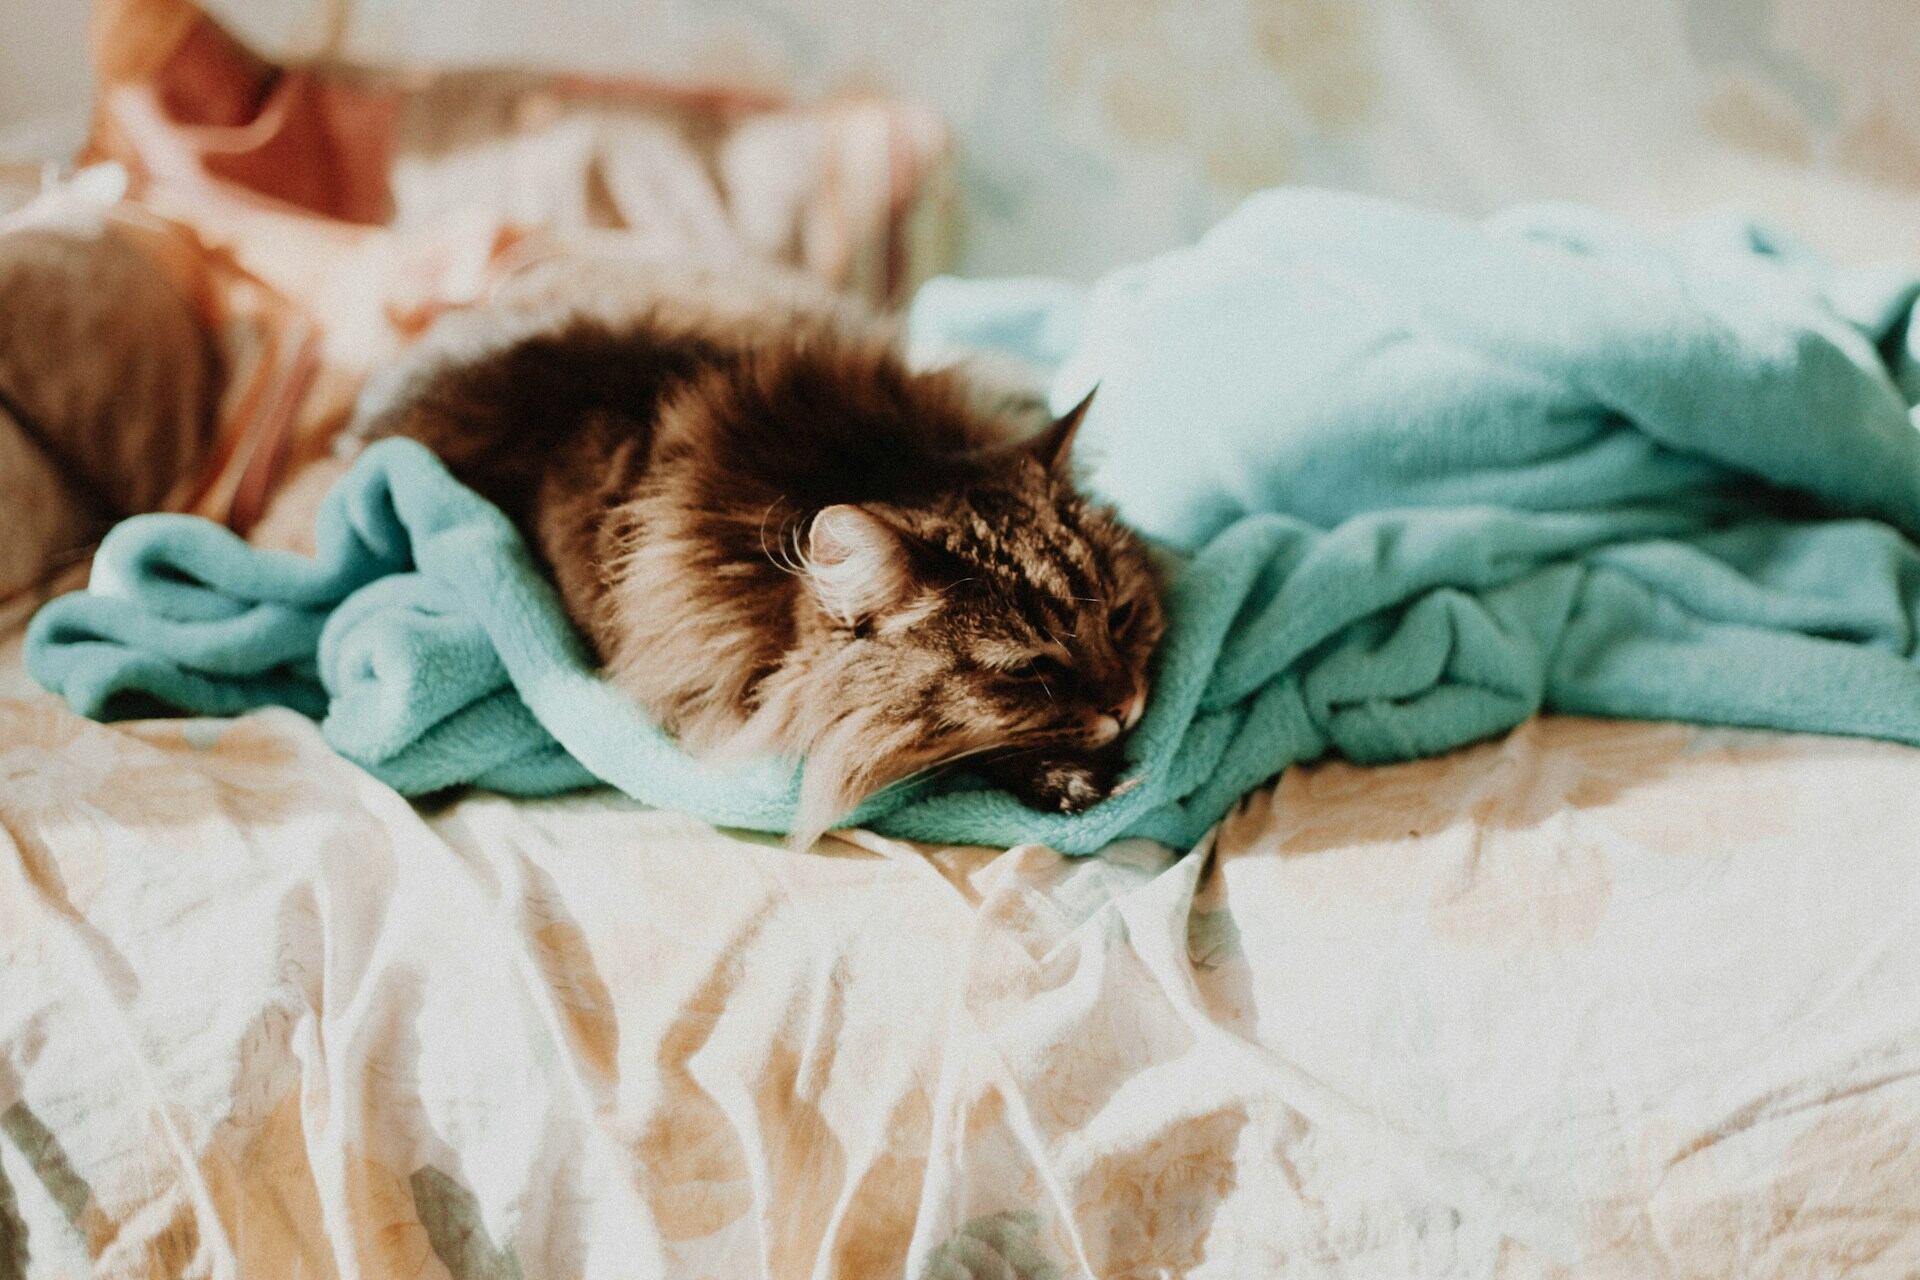 A sick cat lying on a green blanket in bed